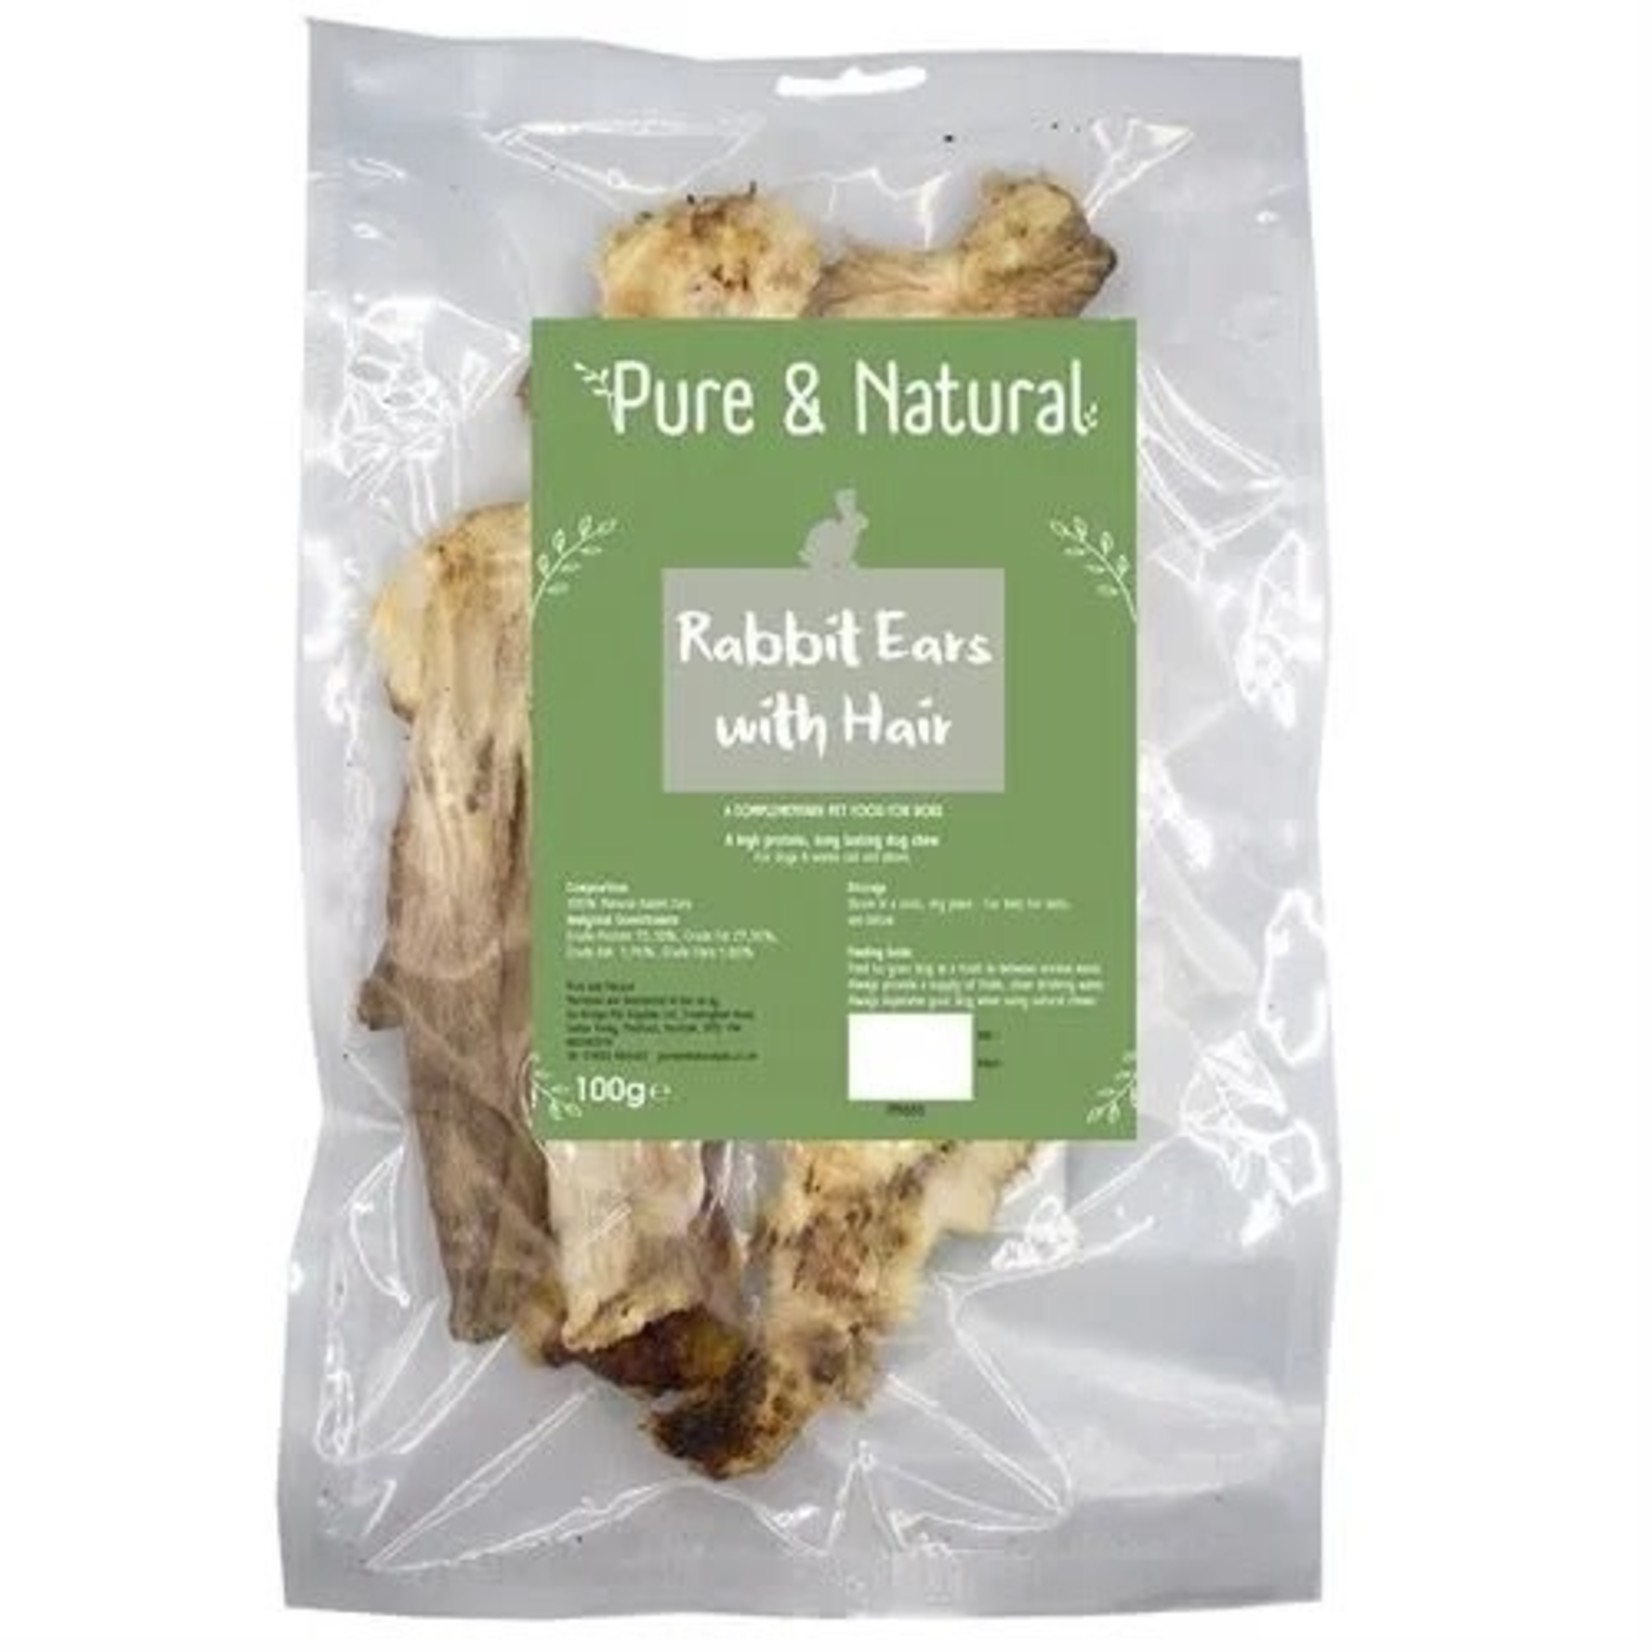 Pure & Natural Rabbit Ears with Hair Dog Treats, 100g